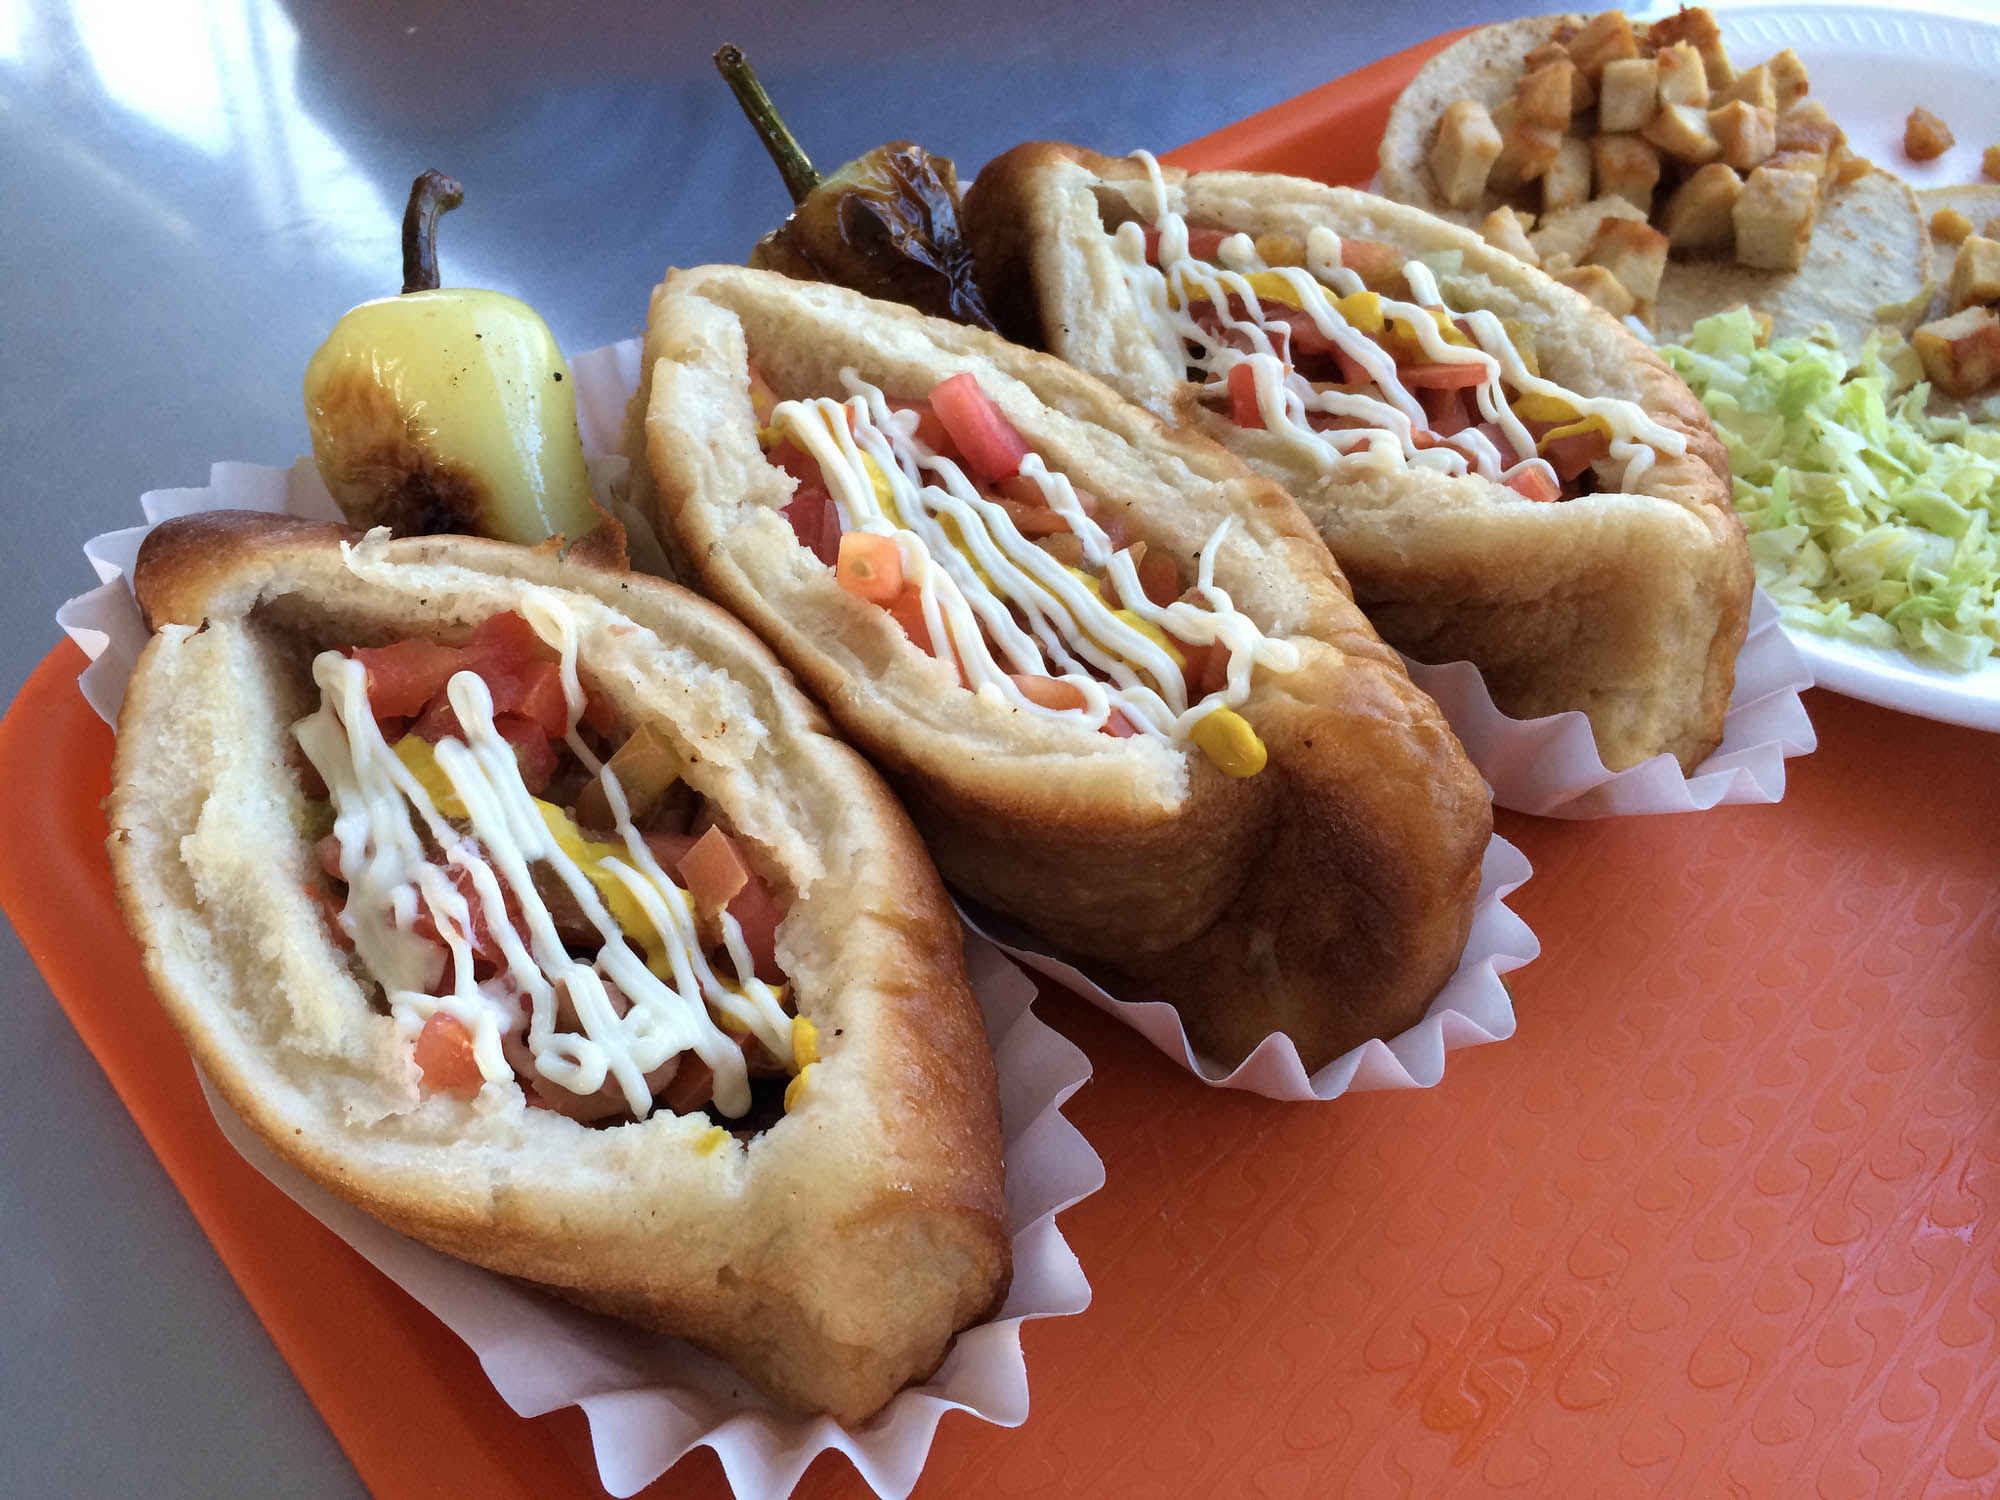 The 10 Best Hot Dog Joints in Arizona!